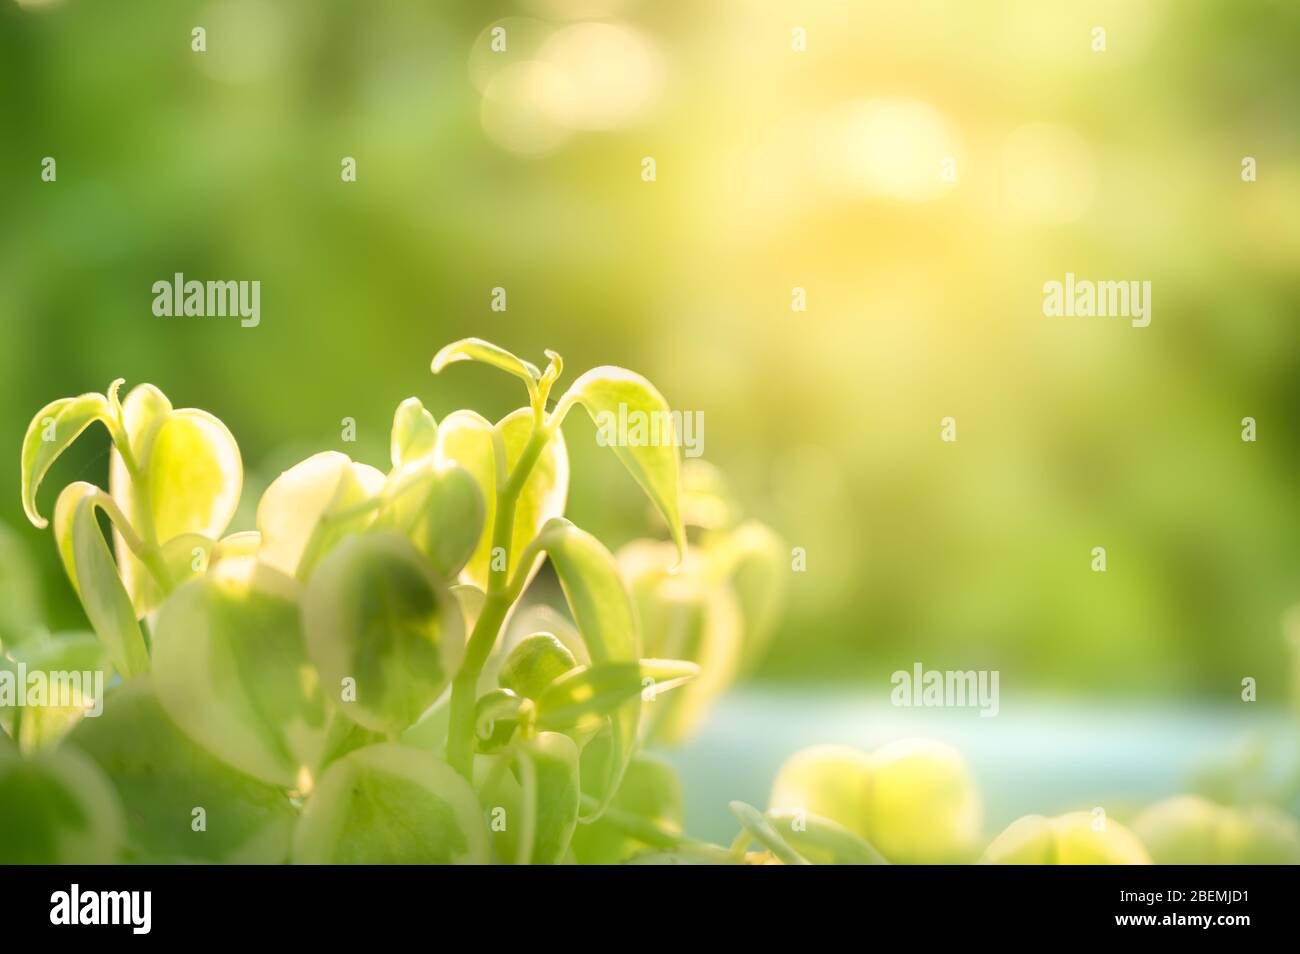 Close-up Peperomia green leaves in garden on natural background Stock Photo